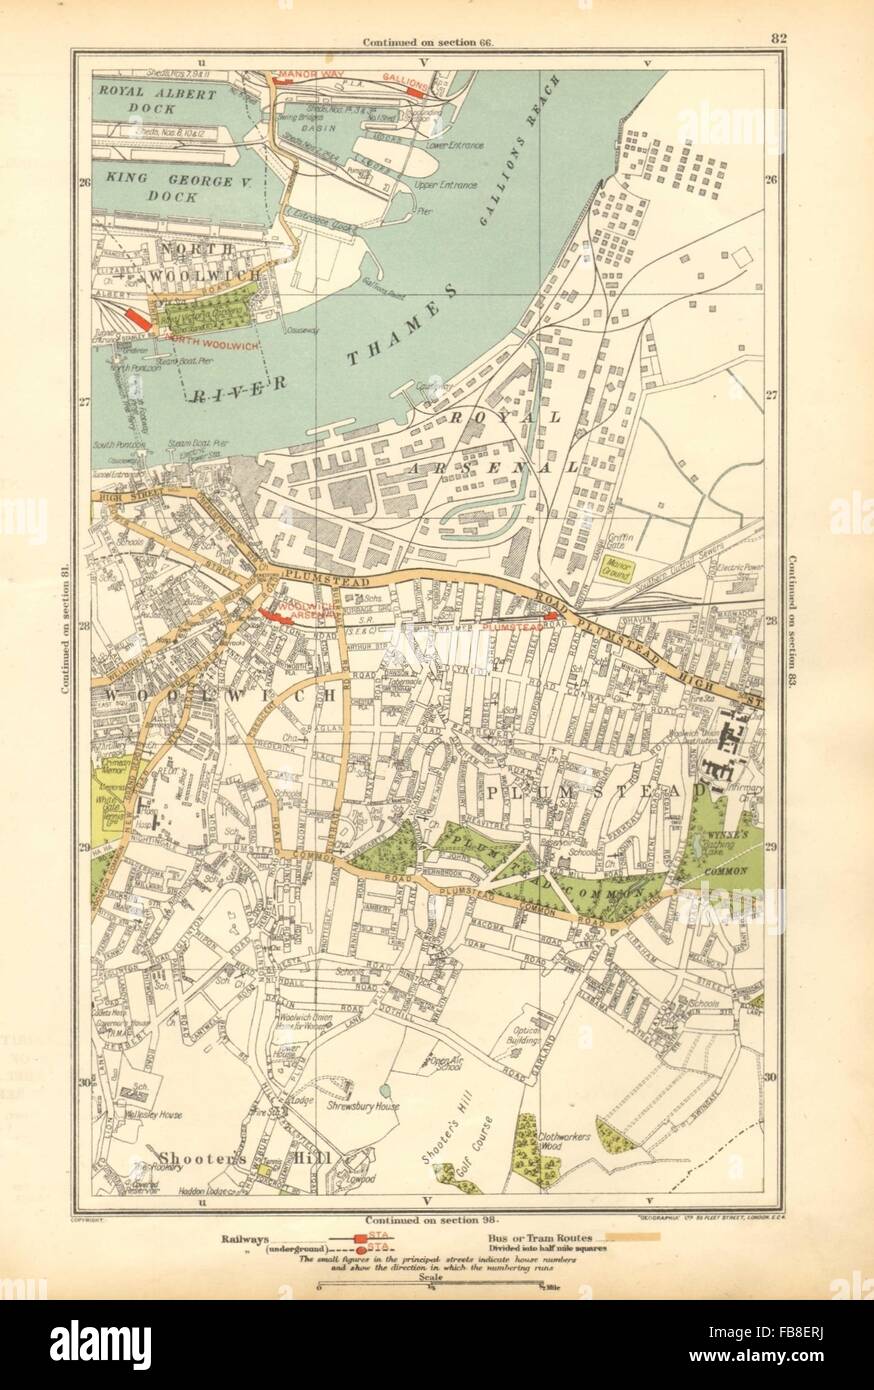 Londres: North Woolwich,Plumstead,Gallions,Manor forma,Woolwich Arsenal, 1928 mapa Foto de stock